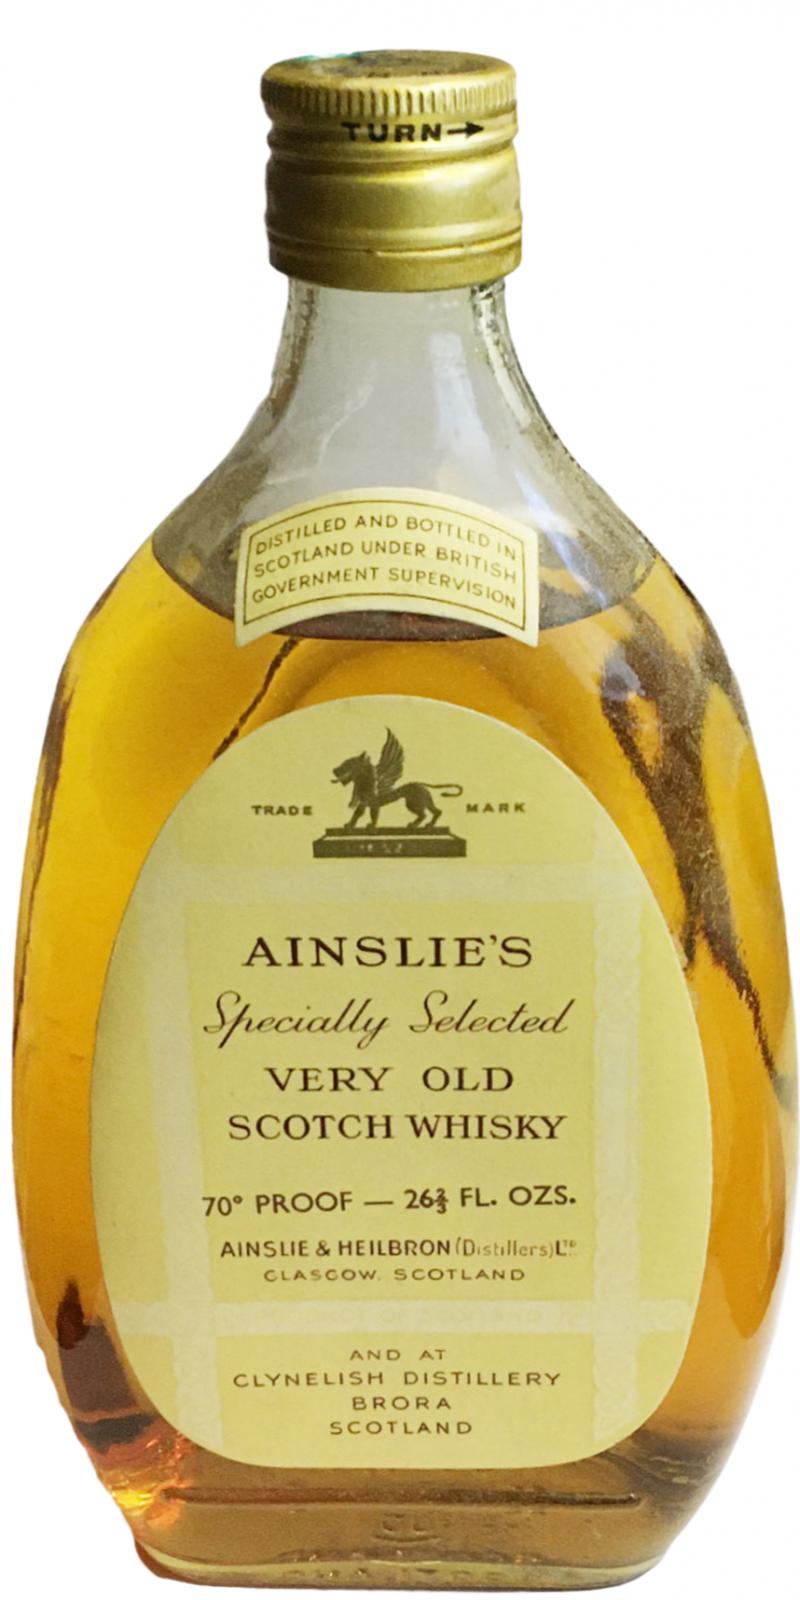 Ainslie's Specially Selected